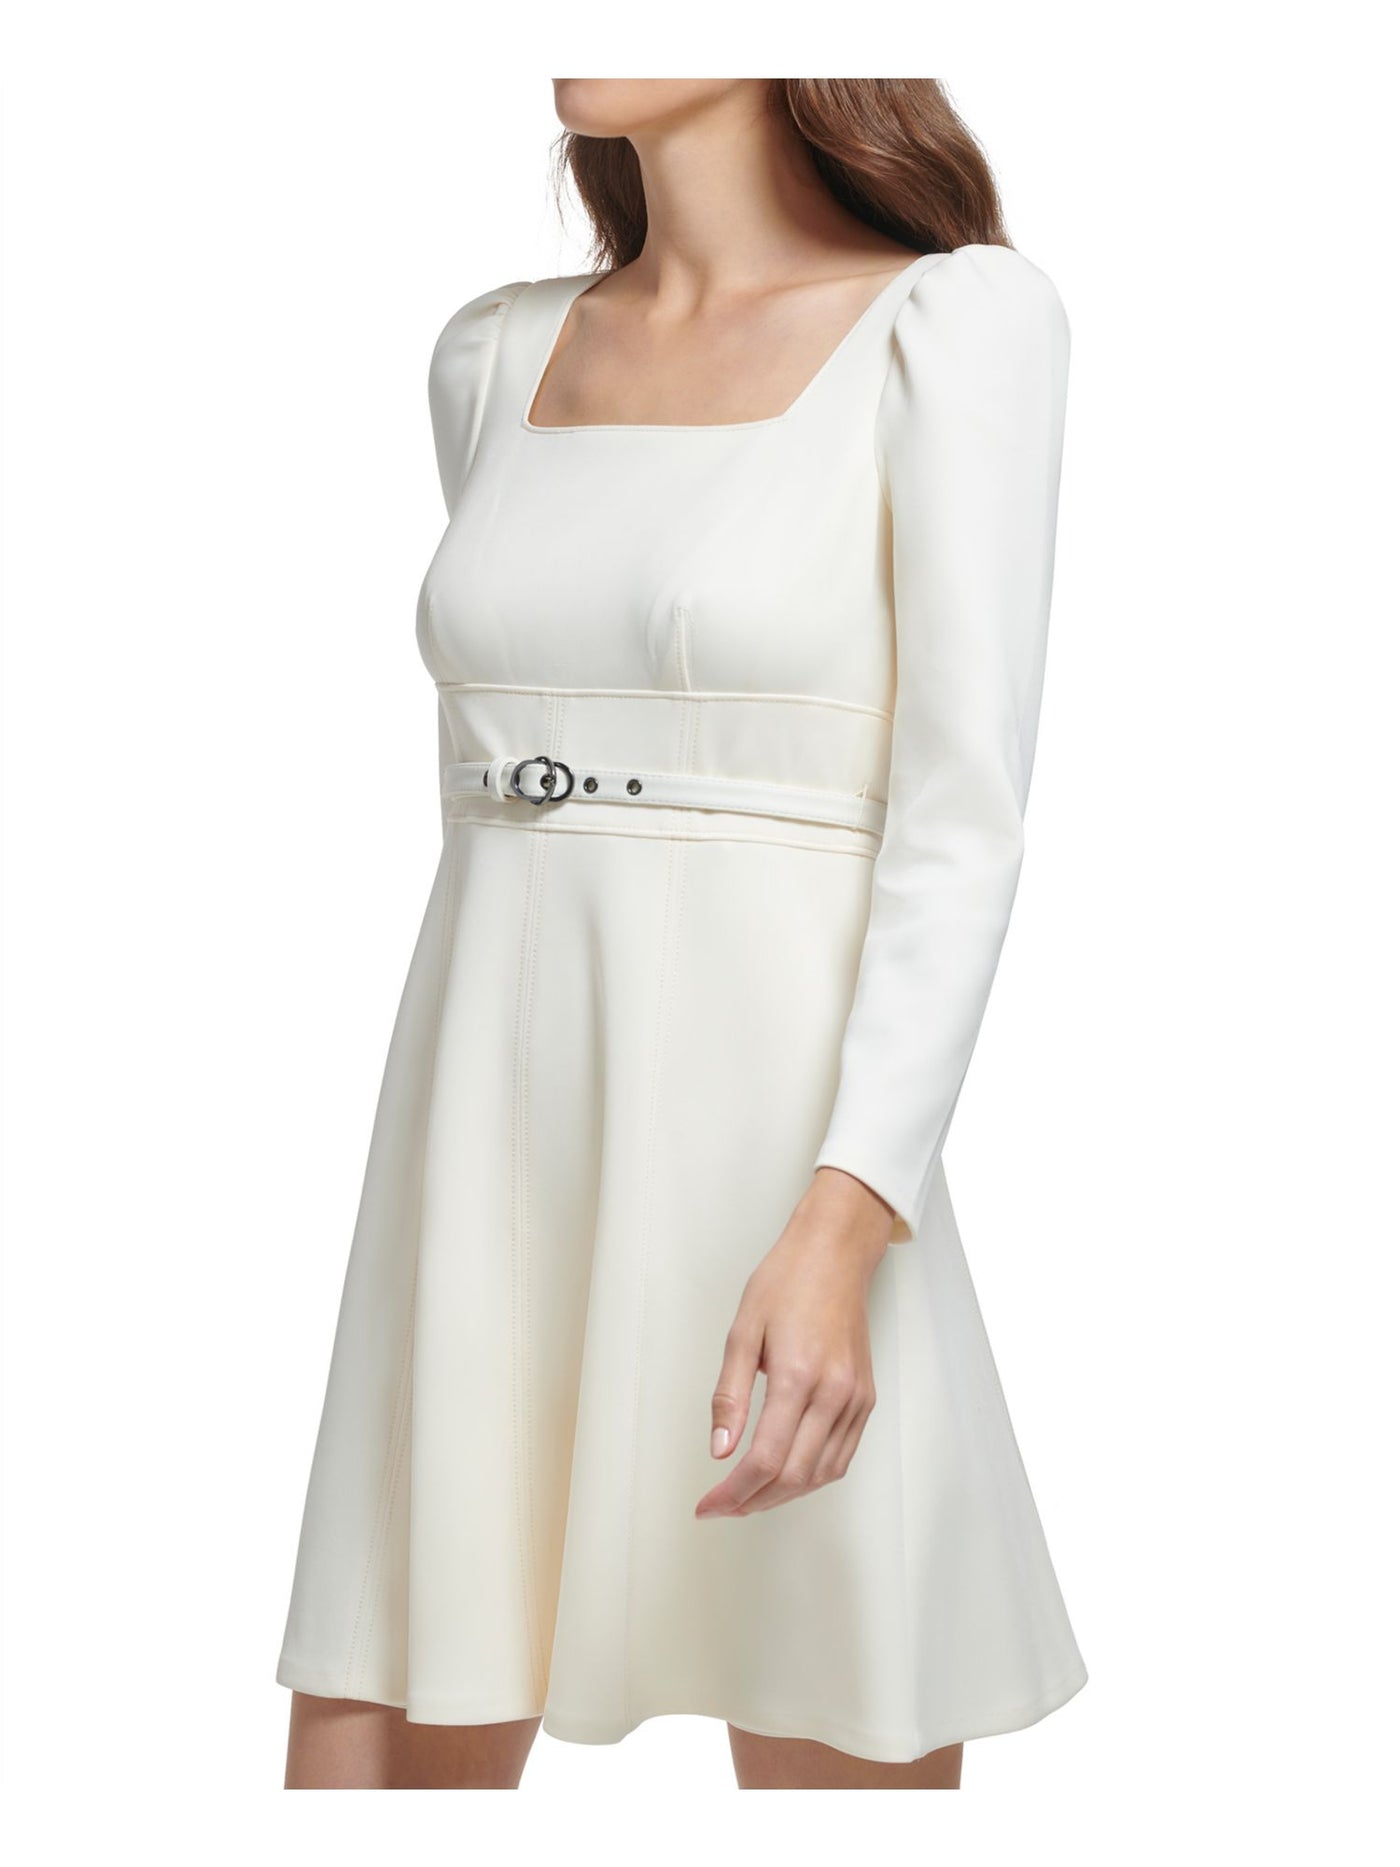 DKNY Womens Ivory Belted Unlined Bracelet Length Sleeves Square Neck Above The Knee Party Fit + Flare Dress 4